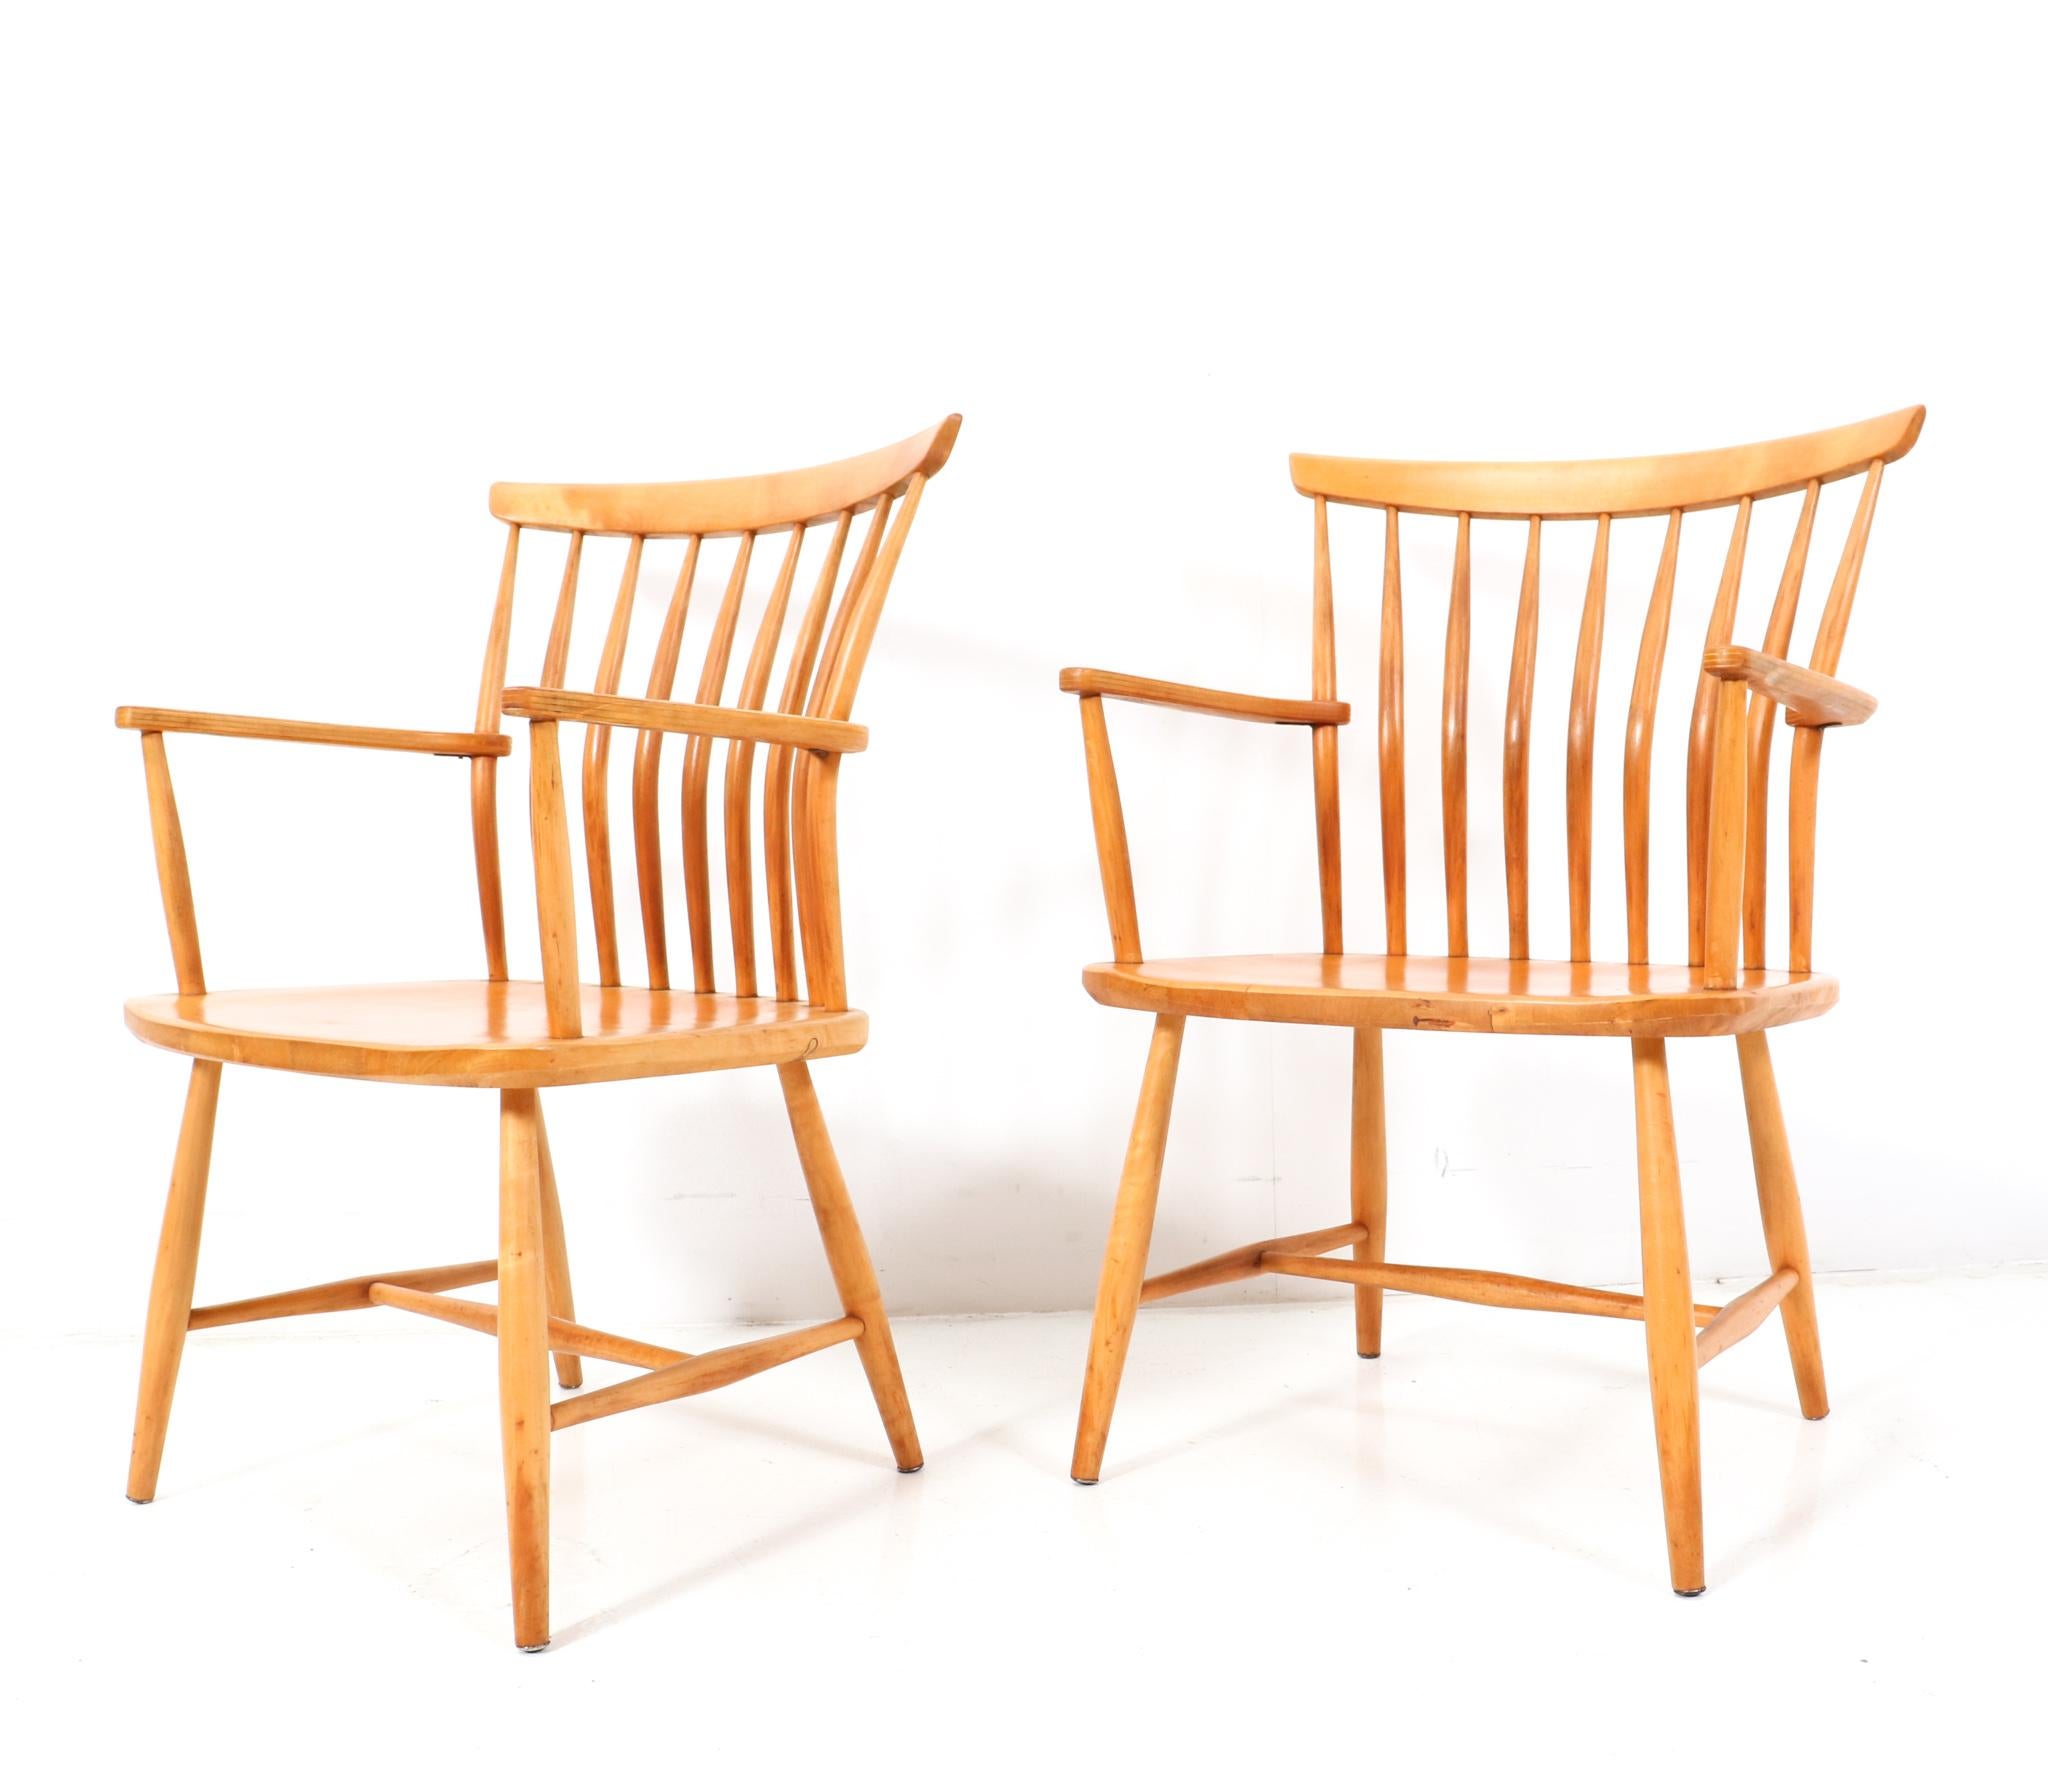 Two Birch Mid-Century Modern Armchairs by Bengt Akerblom & Gunnar Eklöf, 1950s In Good Condition For Sale In Amsterdam, NL